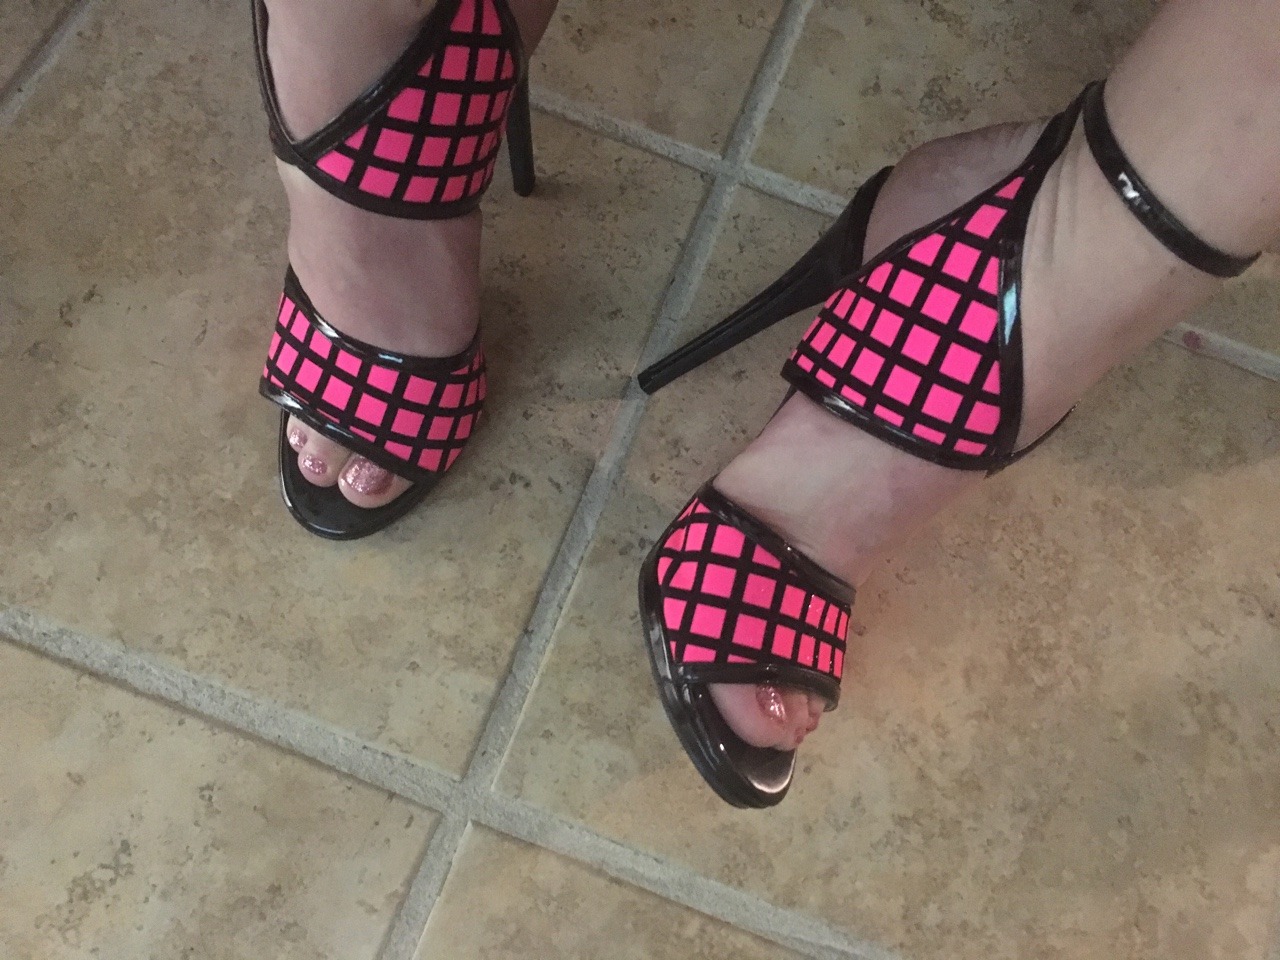 New shoes just came in  I’m so loving these Heel is so high forces me to take very